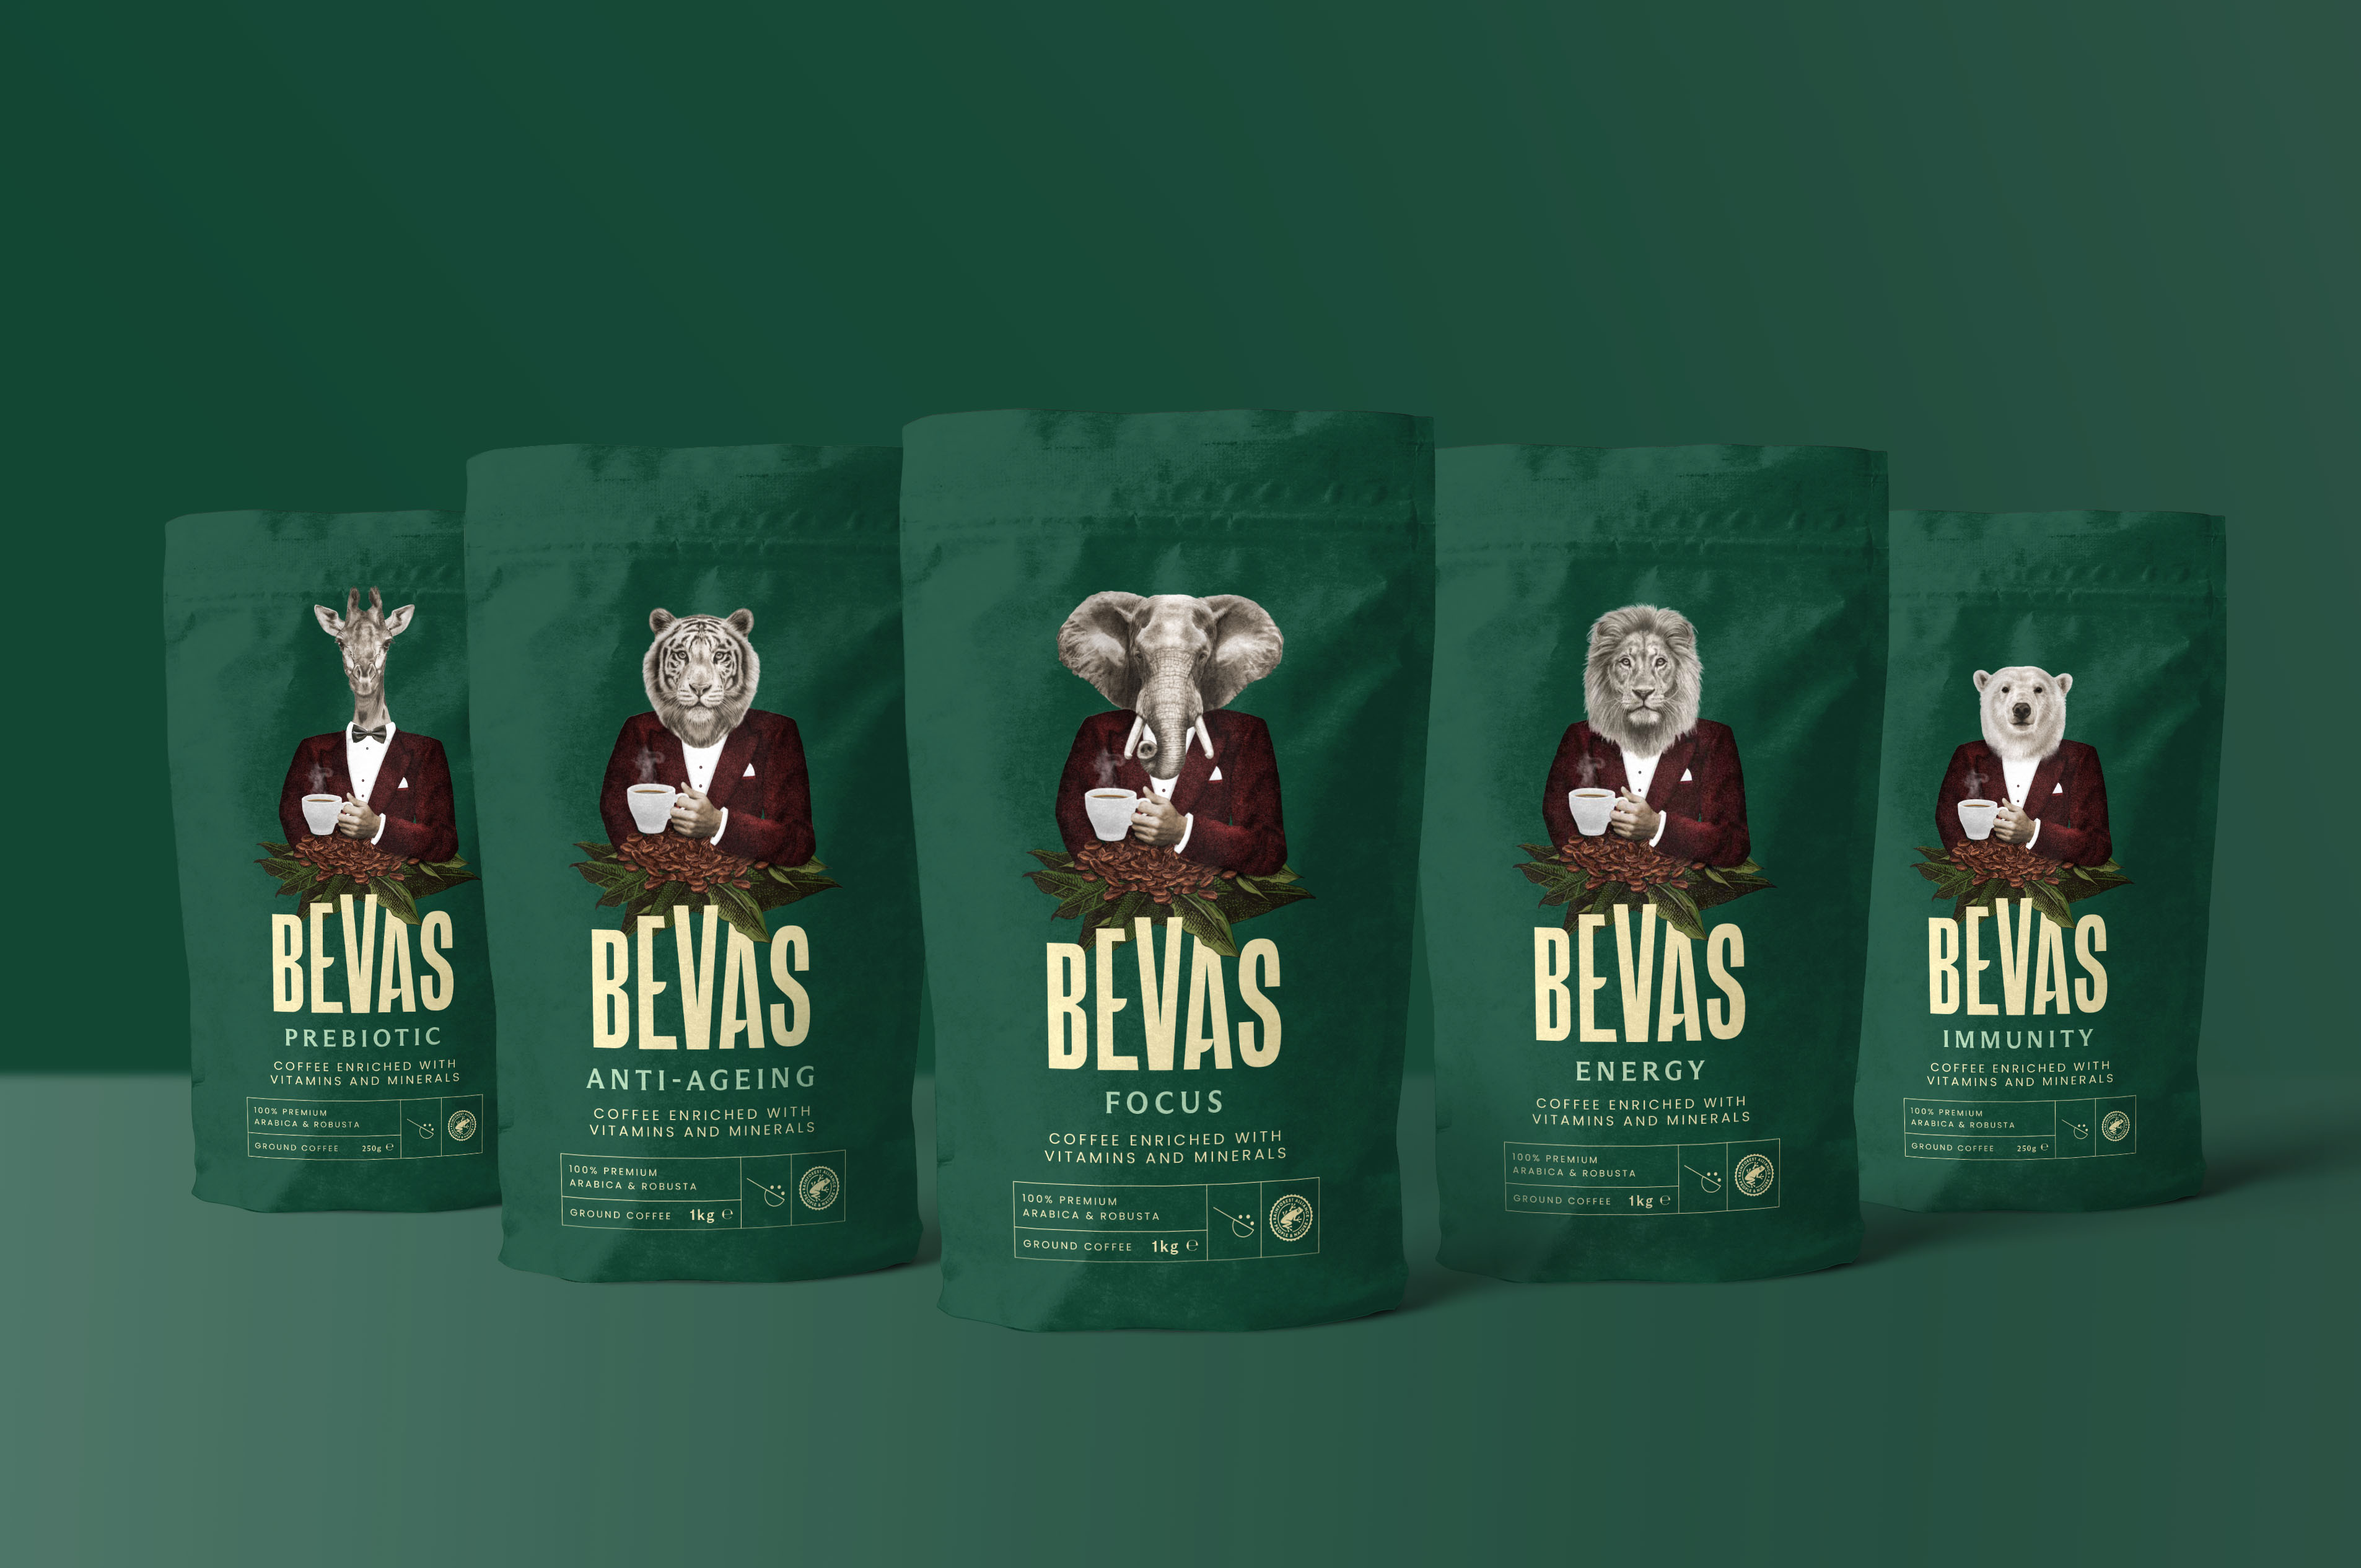 White Bear Studio Creates Packaging Design for Bevas New Breed of Functional Coffee Blends